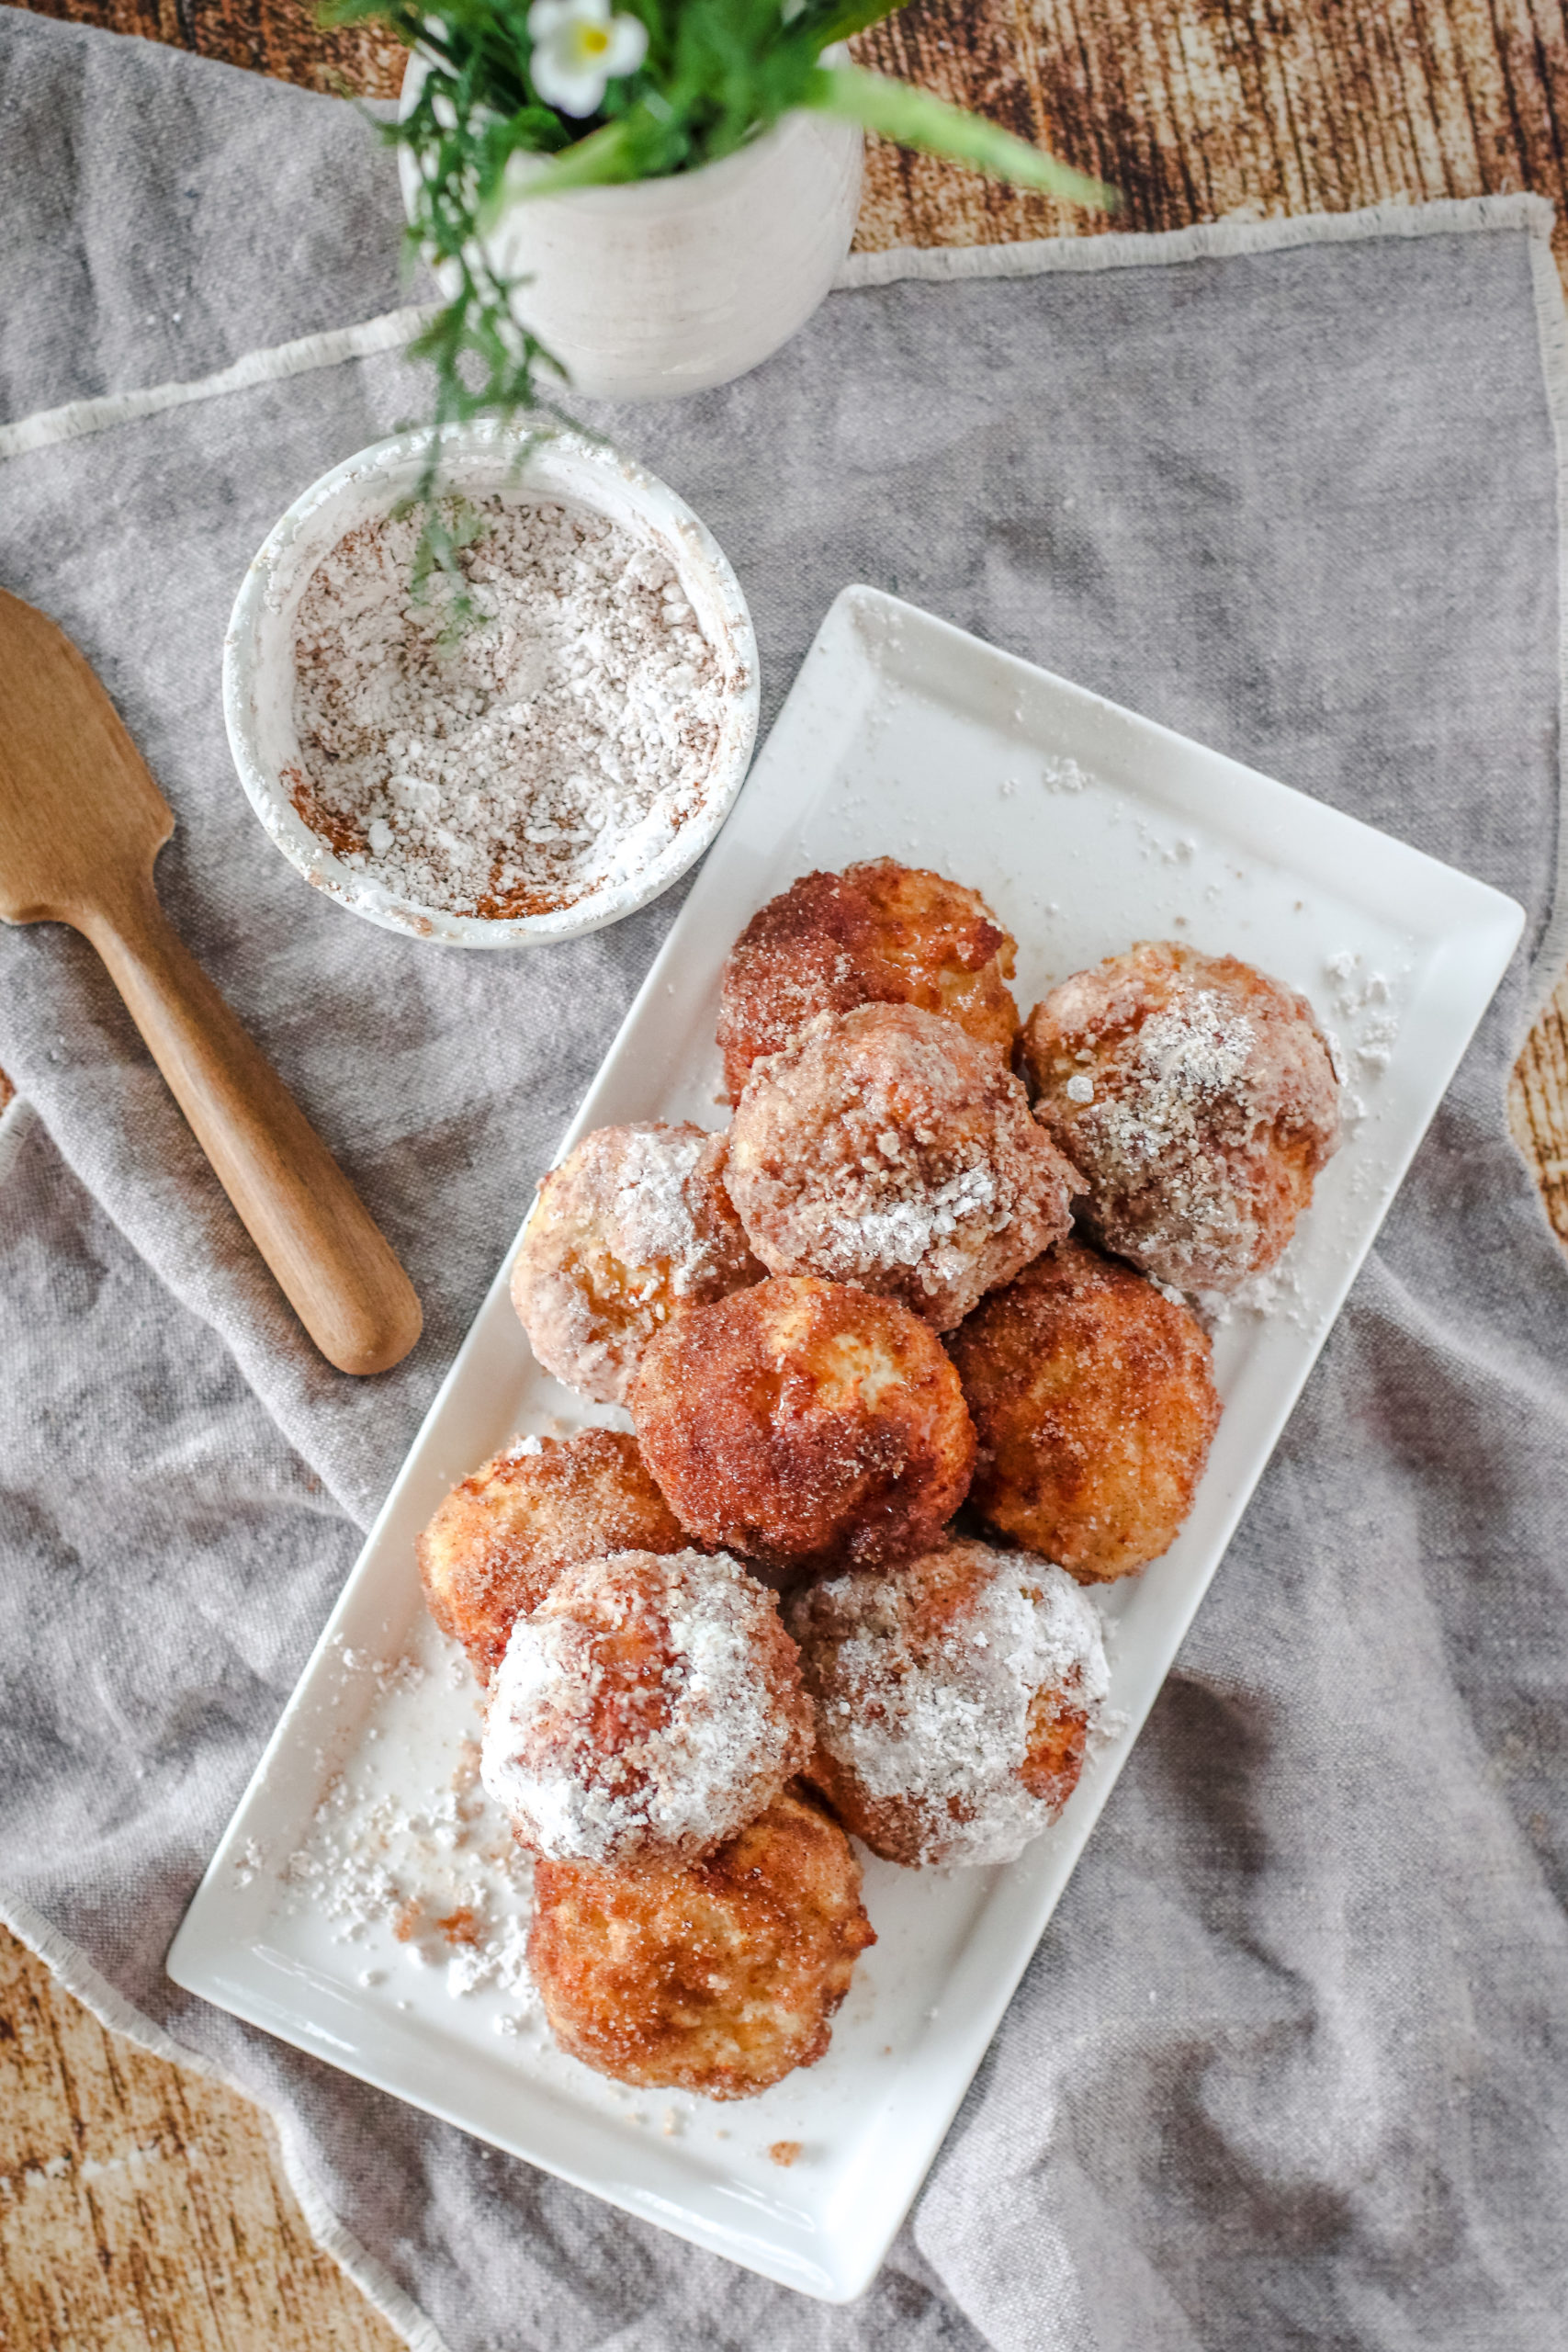 Overhead view of a platter of air fryer cinnamon sugar donuts